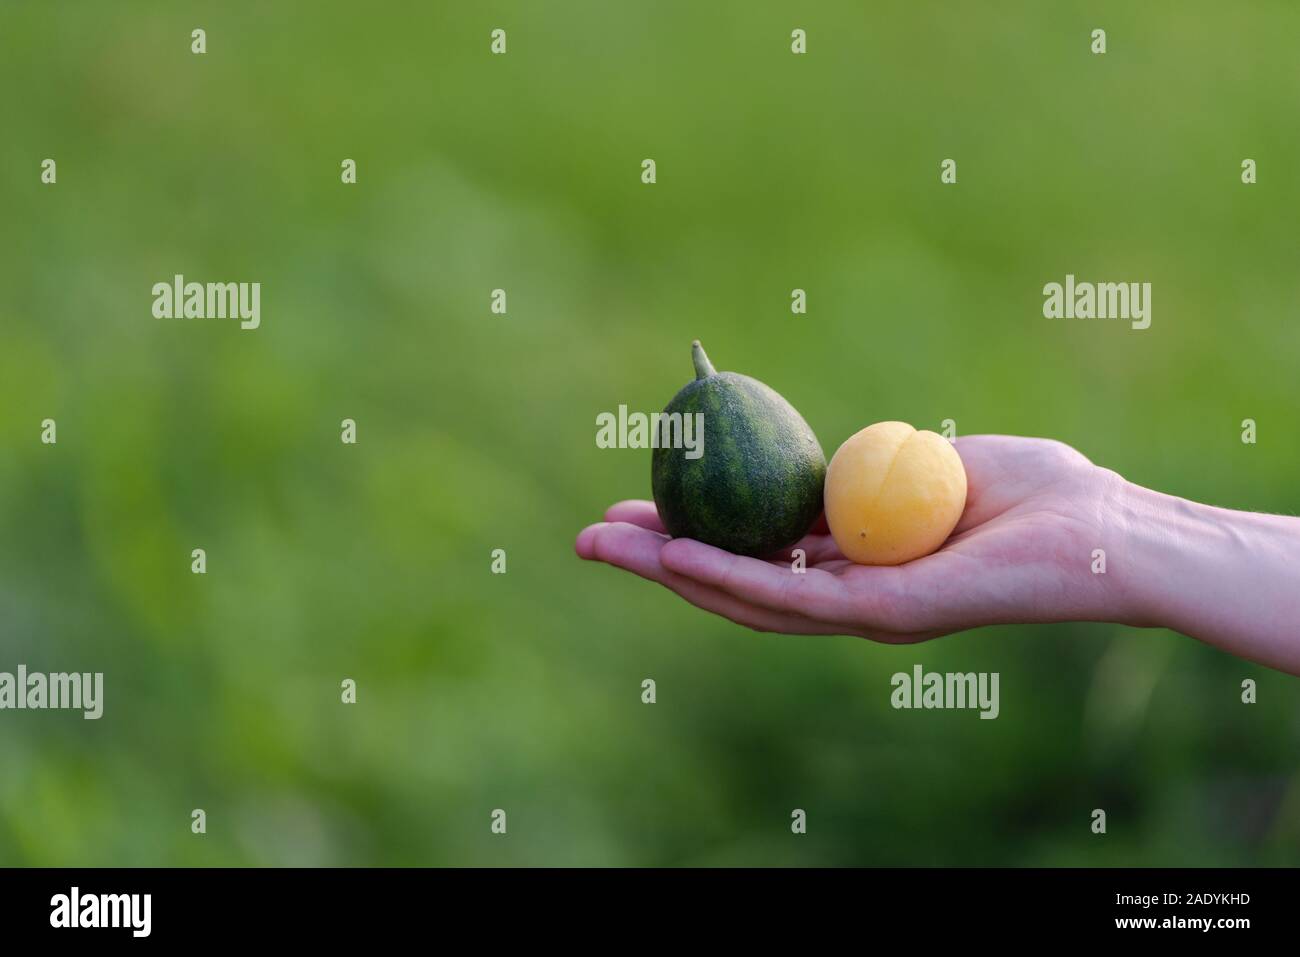 https://c8.alamy.com/comp/2ADYKHD/watermelon-the-size-of-an-apricot-lie-together-in-one-hand-2ADYKHD.jpg